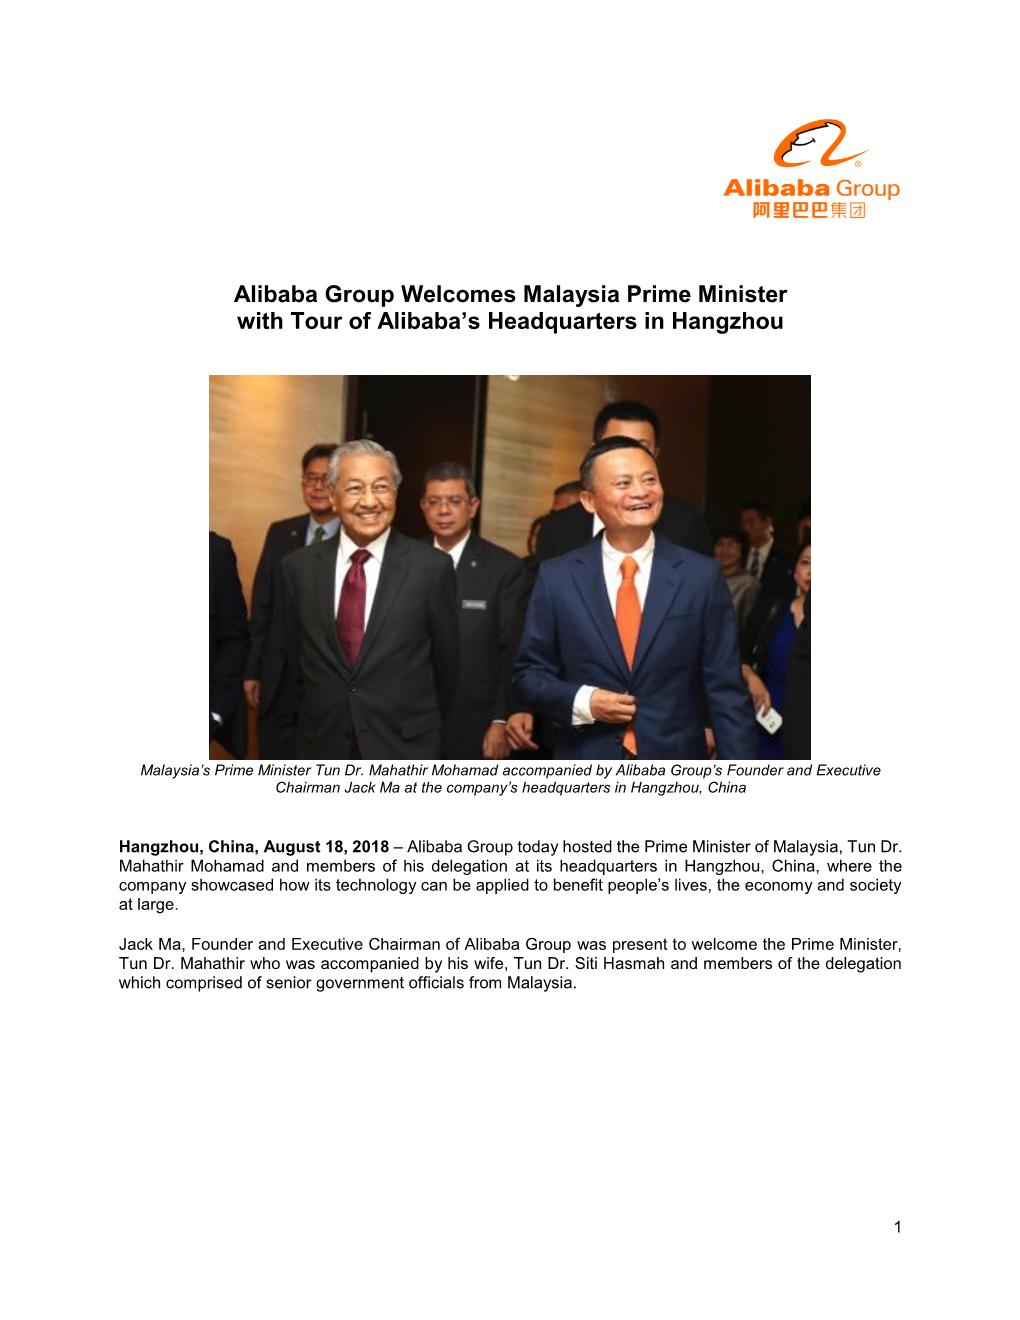 Alibaba Group Welcomes Malaysia Prime Minister with Tour of Alibaba’S Headquarters in Hangzhou